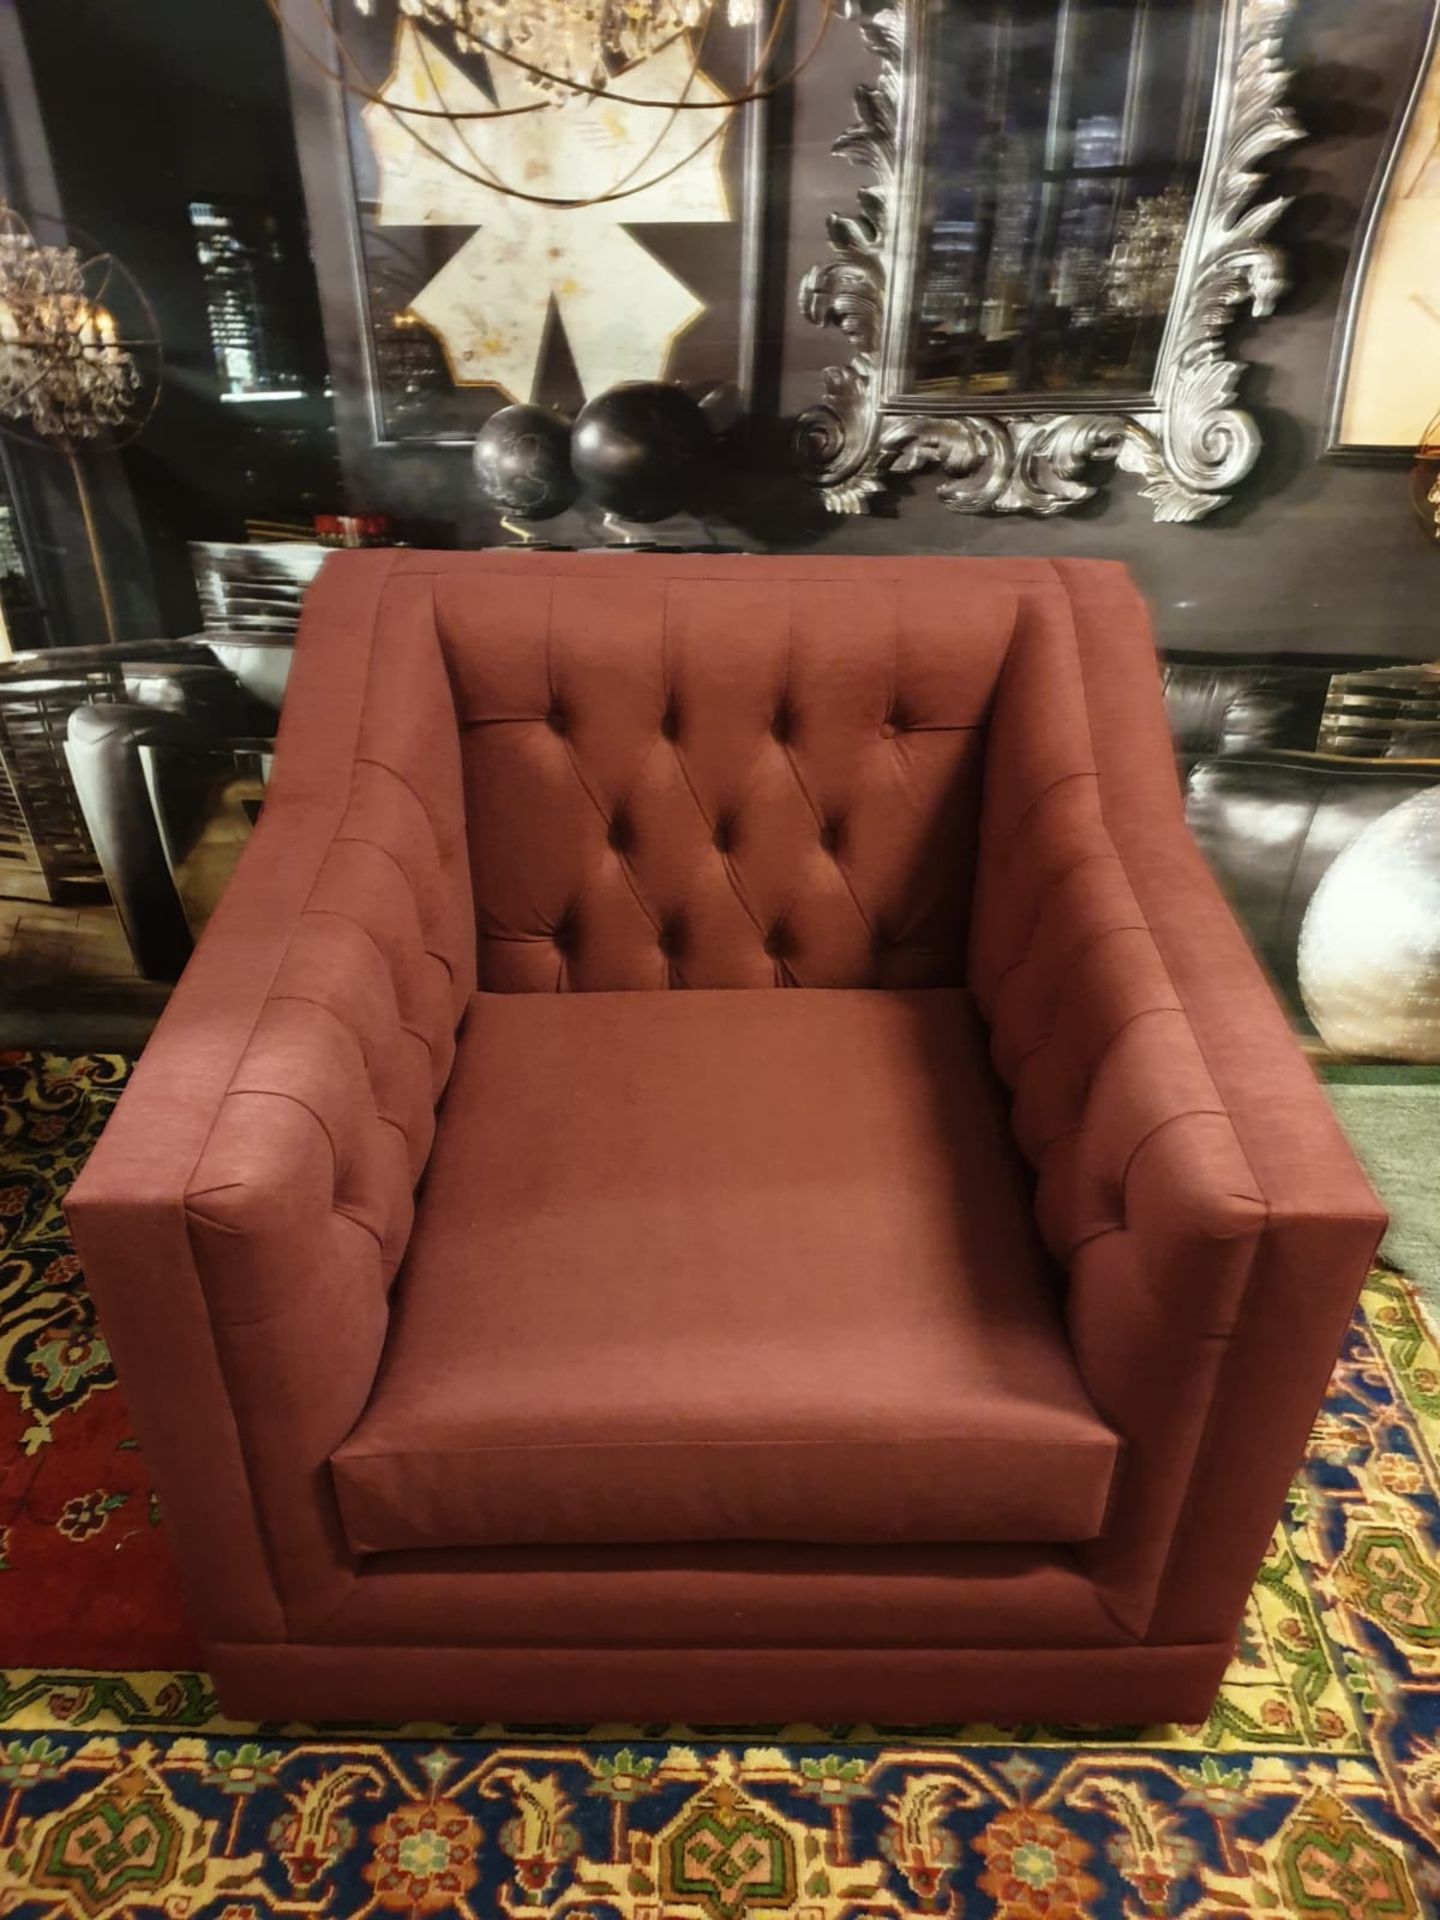 James Armchair Berwick Marsala Style thy name is James. This twist on a Chesterfield is a classic - Bild 2 aus 3